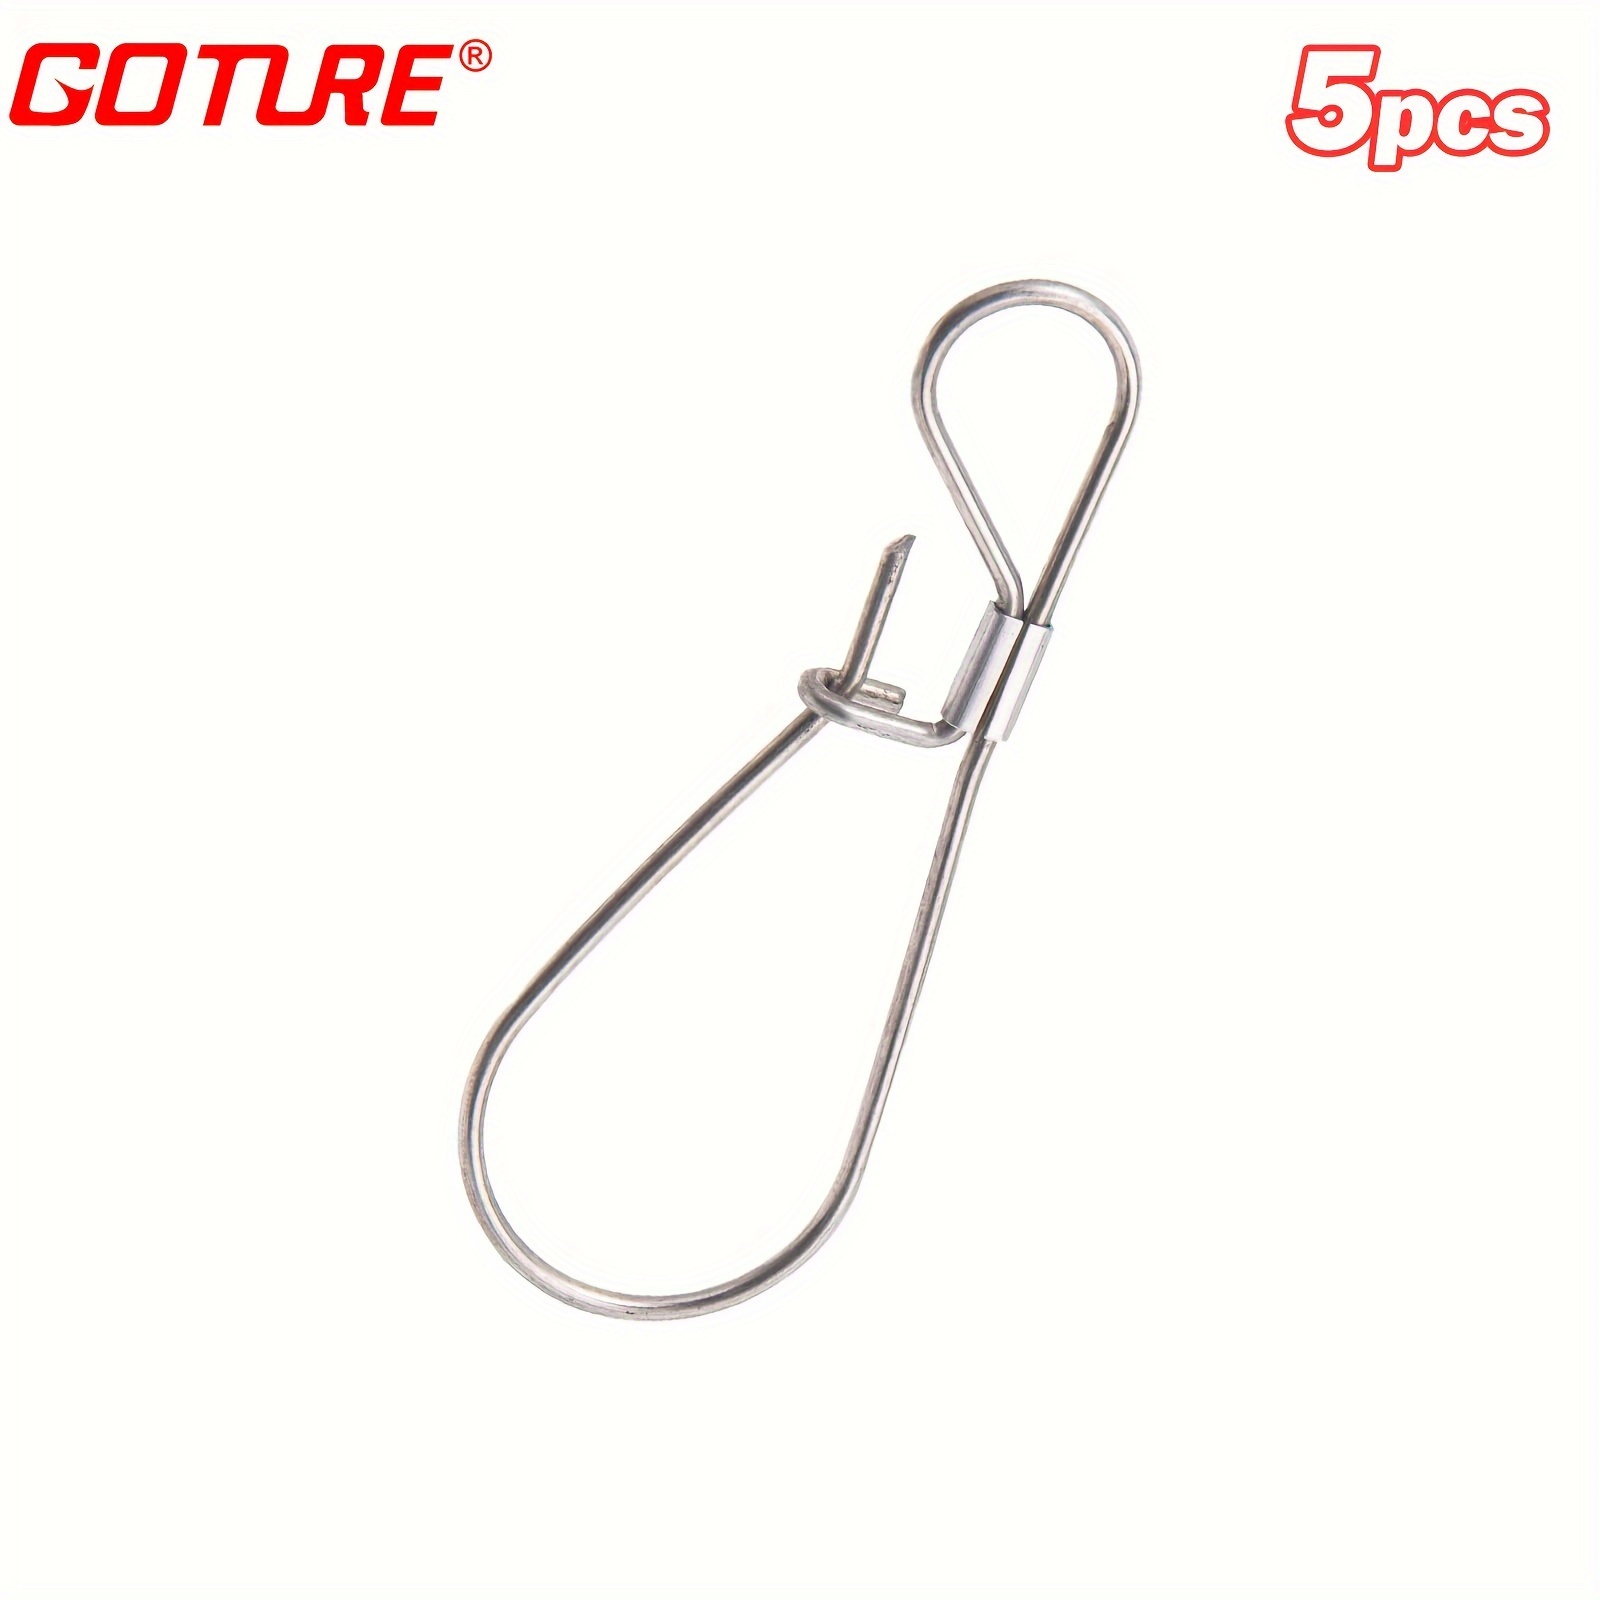 Fishing Stringer Clip Fish Lock Stainless Steel Wire Rope, 43% OFF